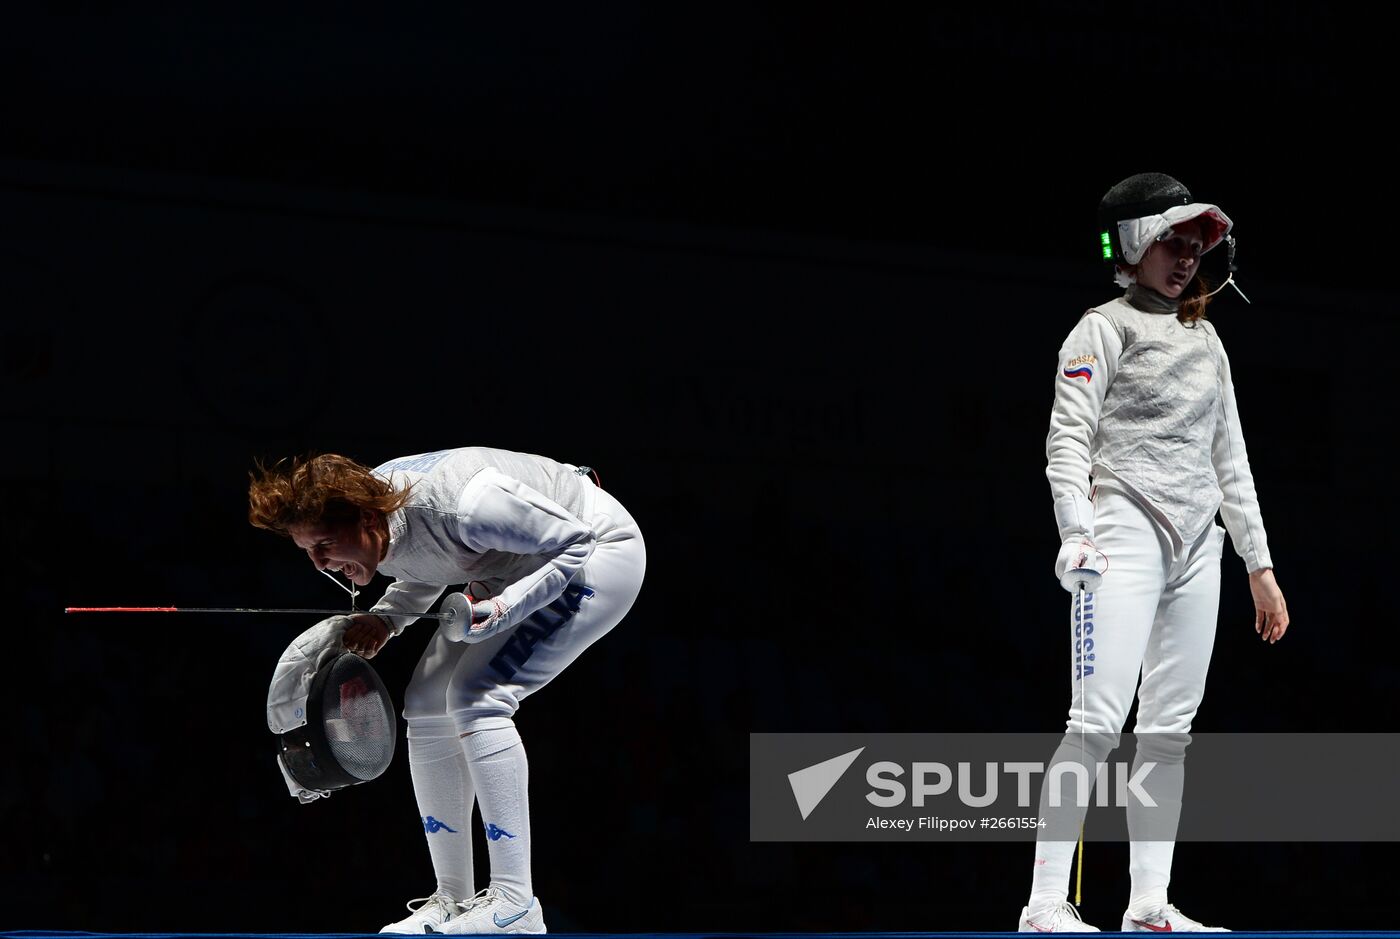 2015 World Fencing Championships. Day 7